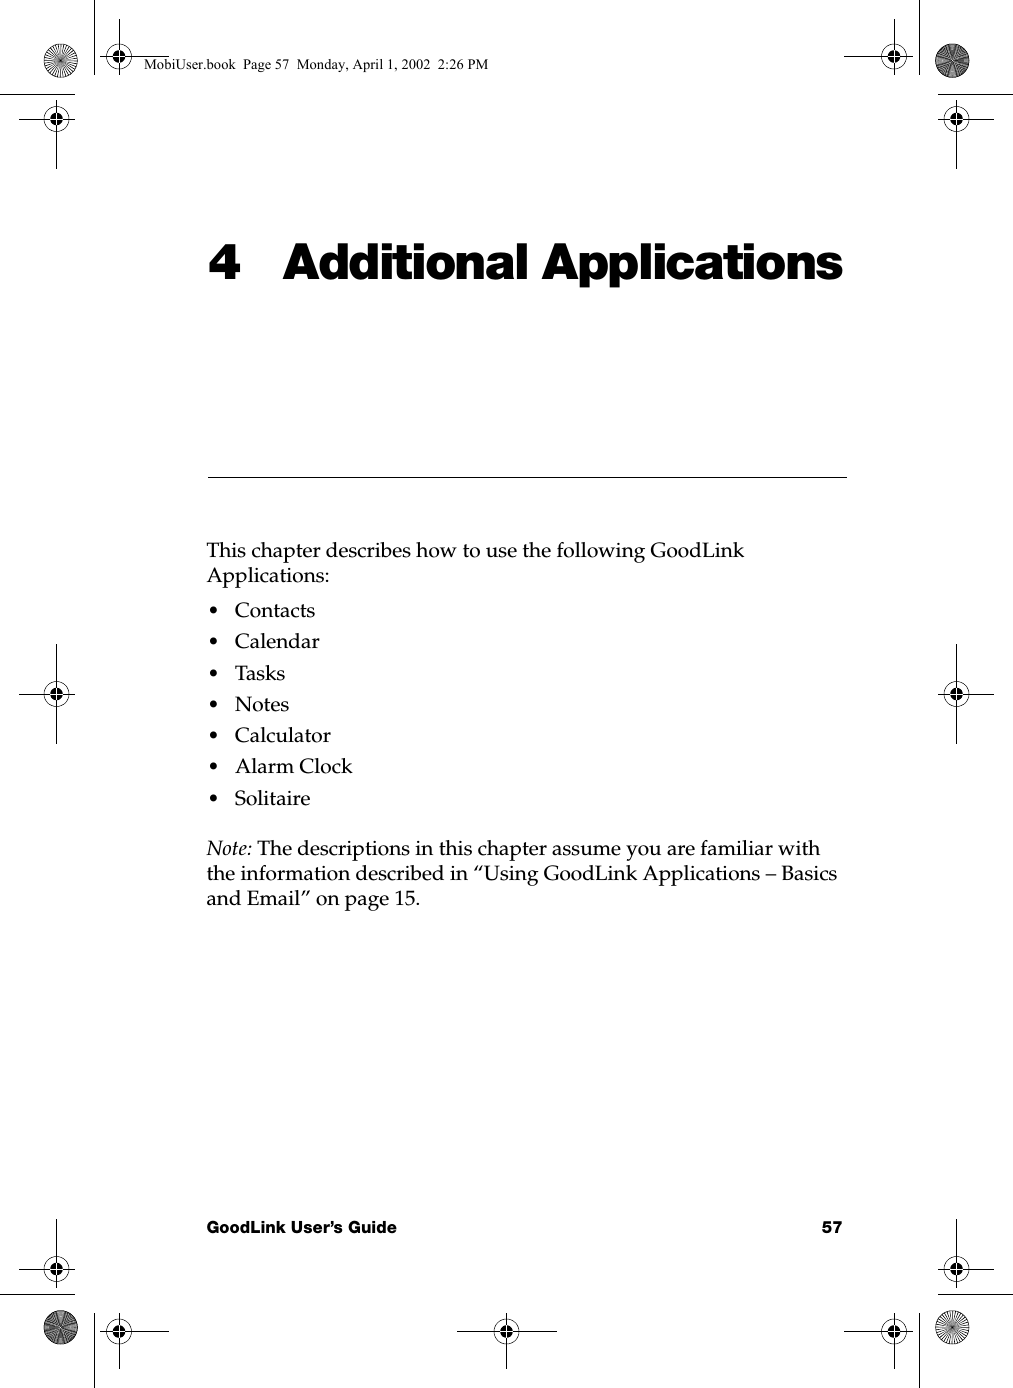 GoodLink User’s Guide 574 Additional ApplicationsThis chapter describes how to use the following GoodLink Applications:•Contacts•Calendar•Tasks•Notes•Calculator•Alarm Clock•SolitaireNote: The descriptions in this chapter assume you are familiar with the information described in “Using GoodLink Applications – Basics and Email” on page 15.MobiUser.book  Page 57  Monday, April 1, 2002  2:26 PM